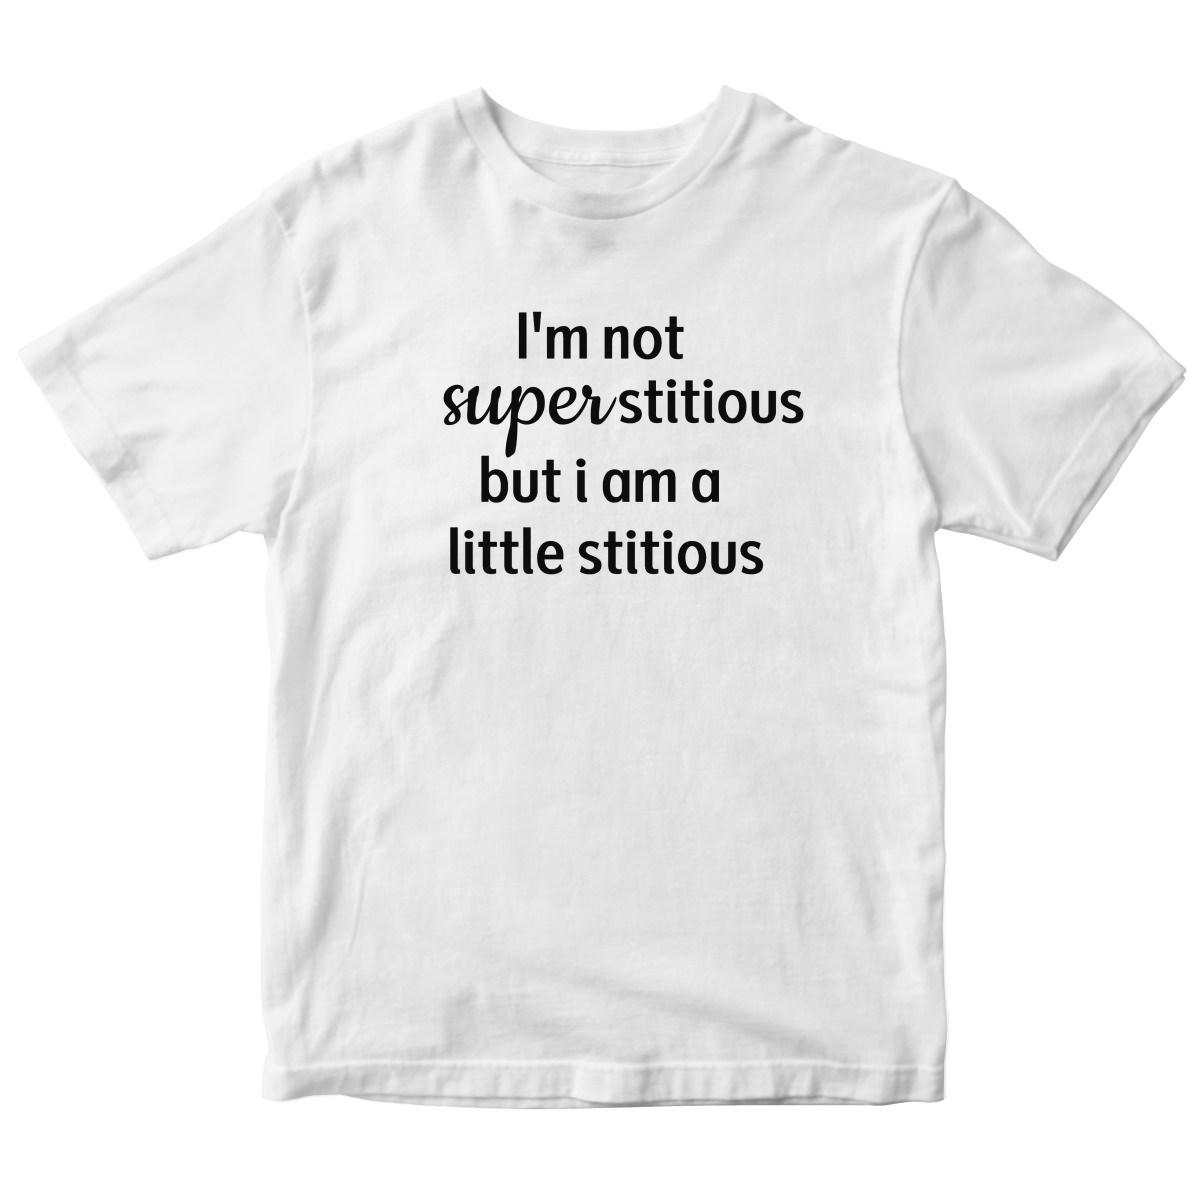 I'm Not Superstitious but I am a Little Stitious Kids T-shirt | White